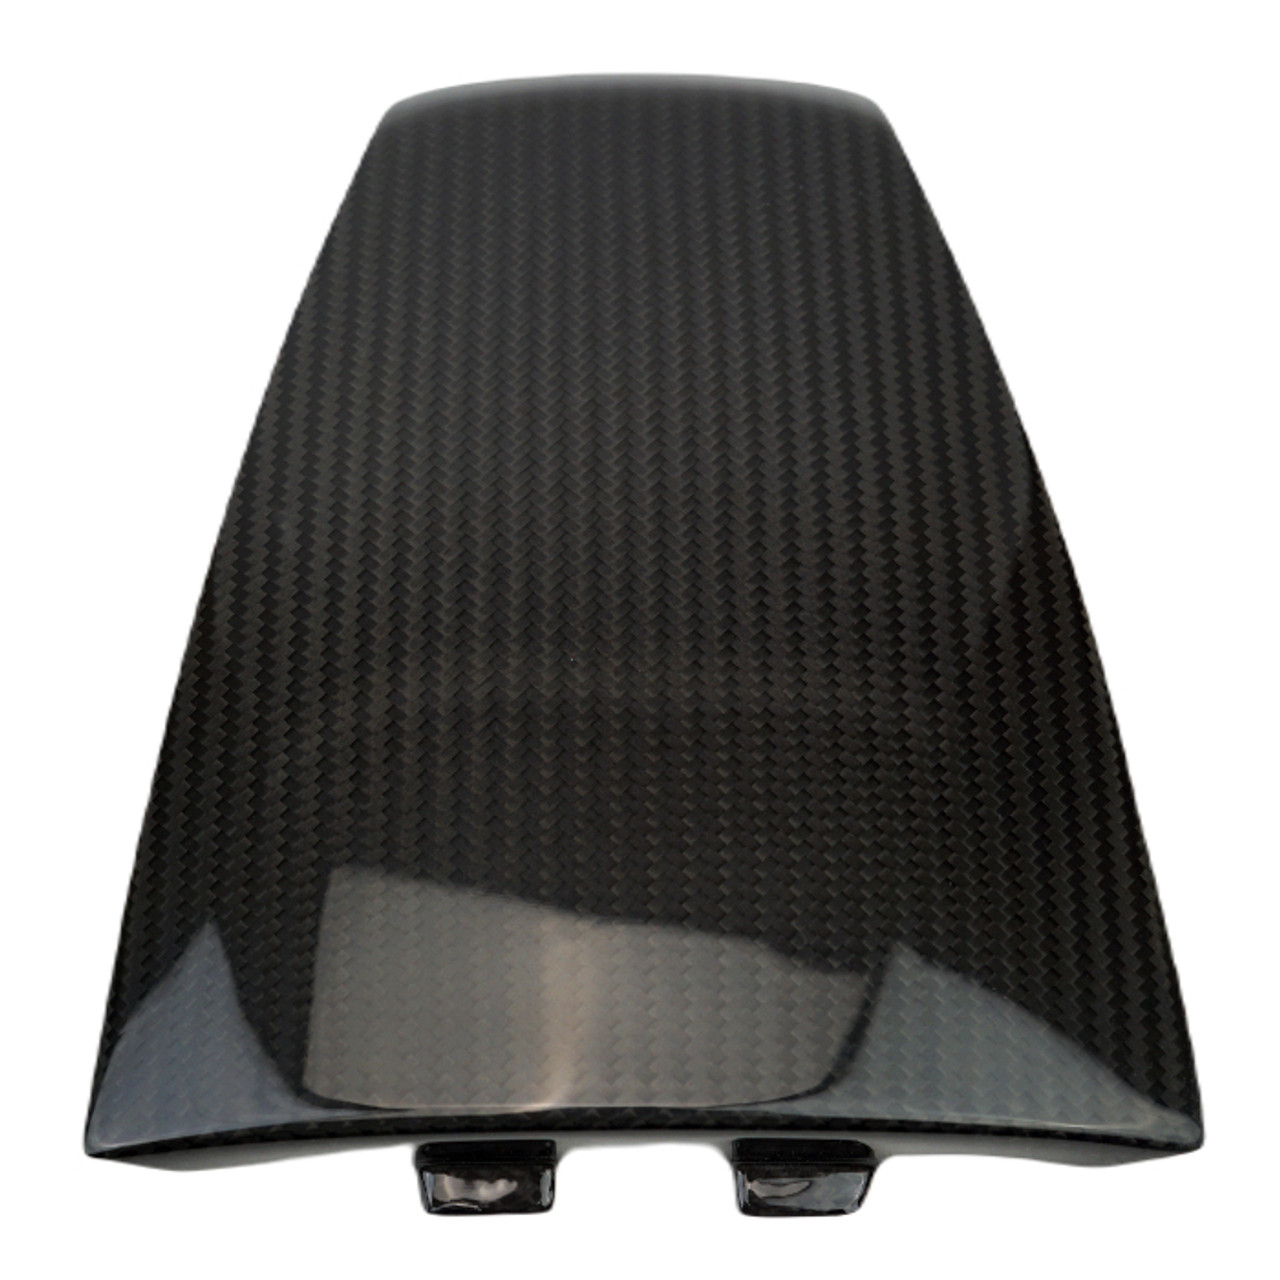 Air Filter Cover in Glossy Twill Weave Carbon Fiber for Harley-Davidson Sportster S